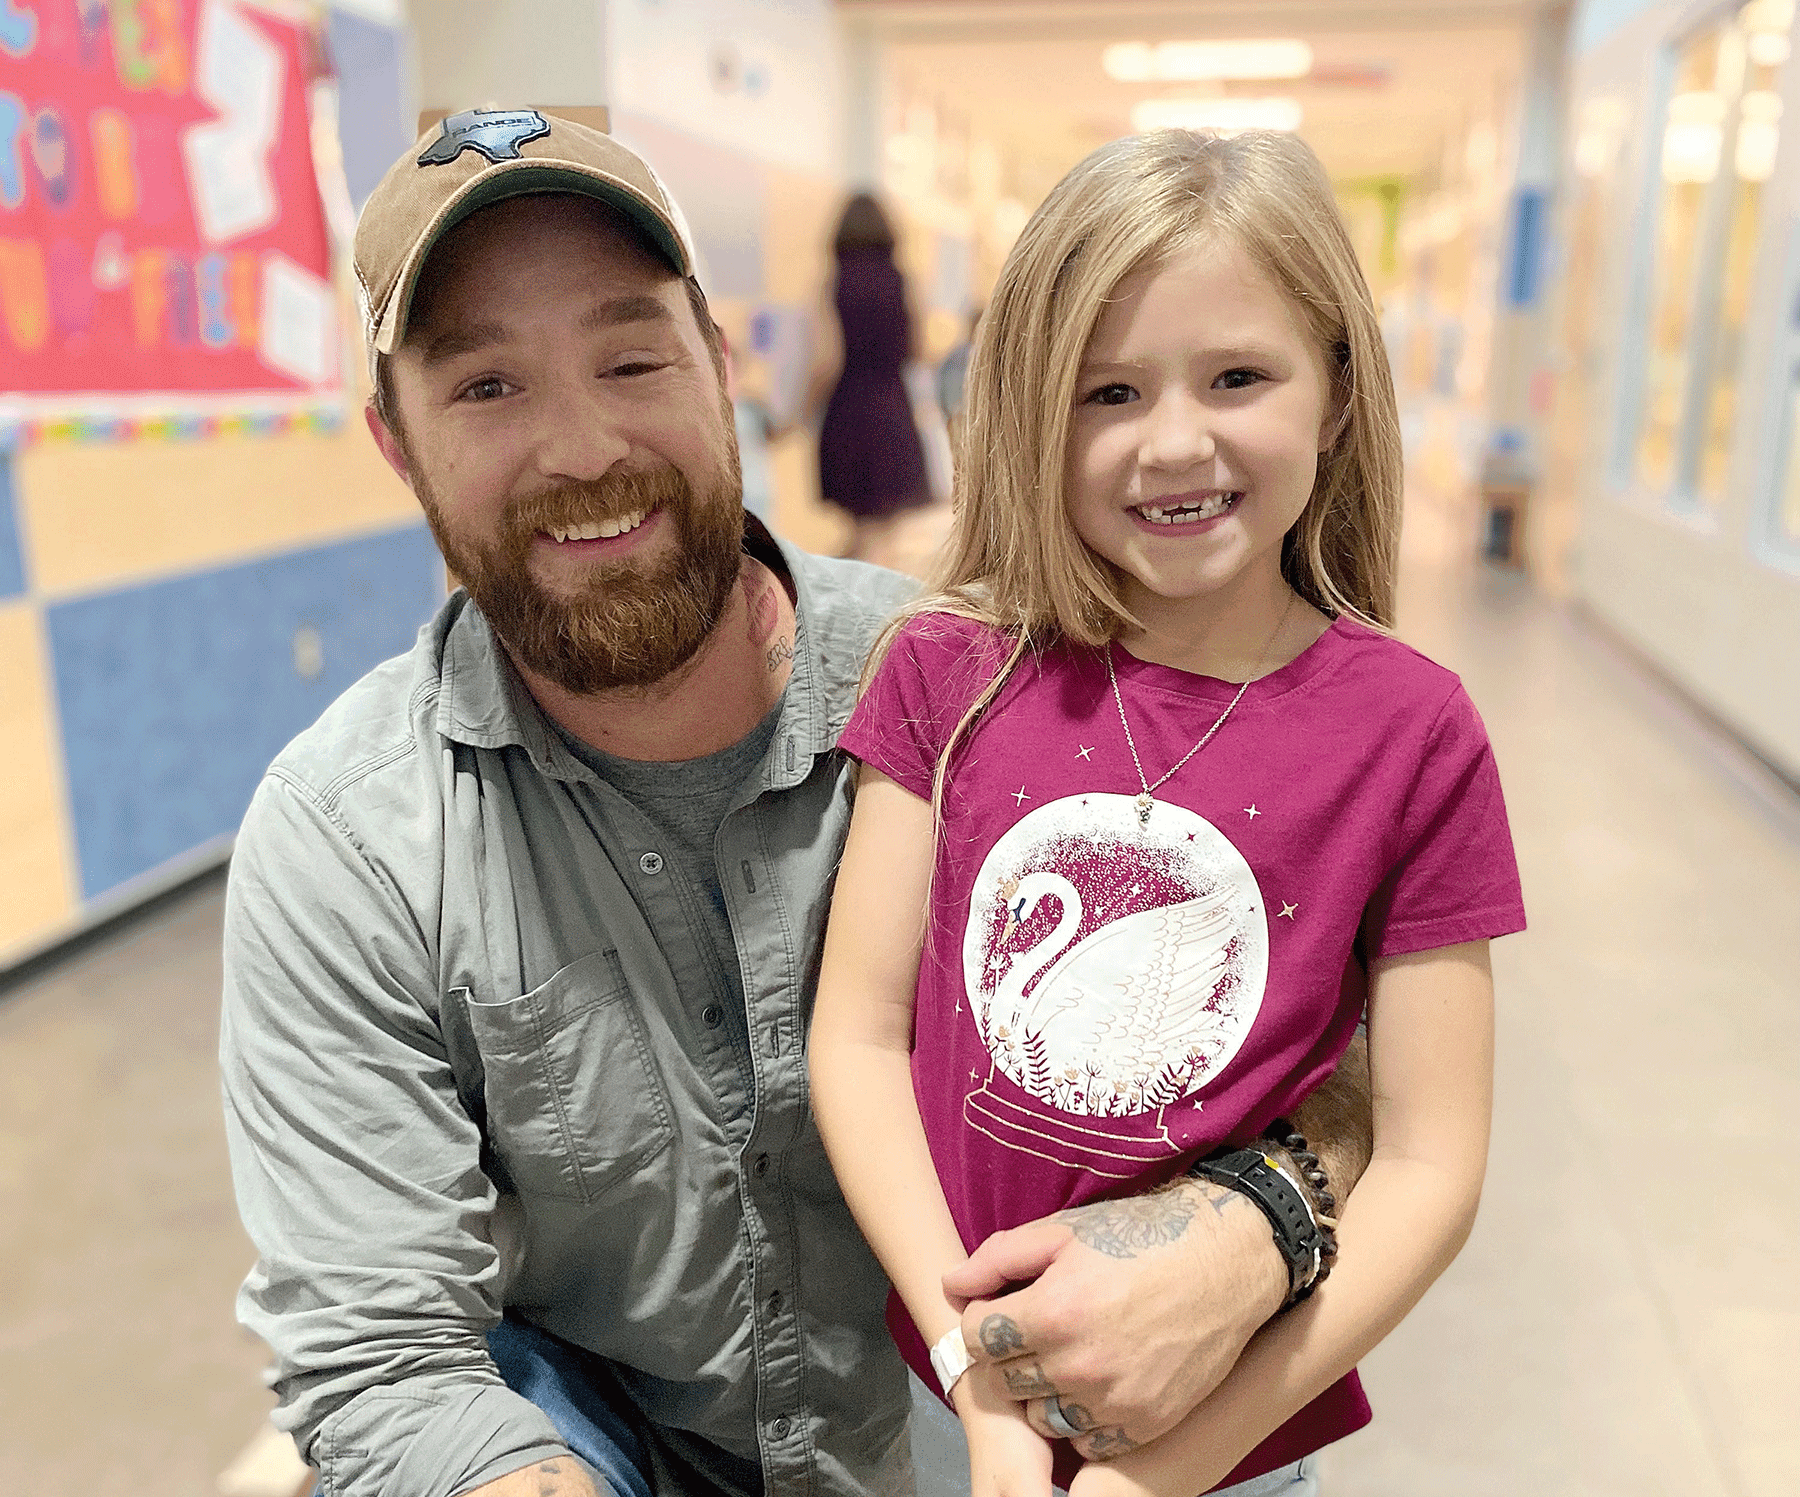 Navy vet gives daughter surprise at Clear Spring Elementary